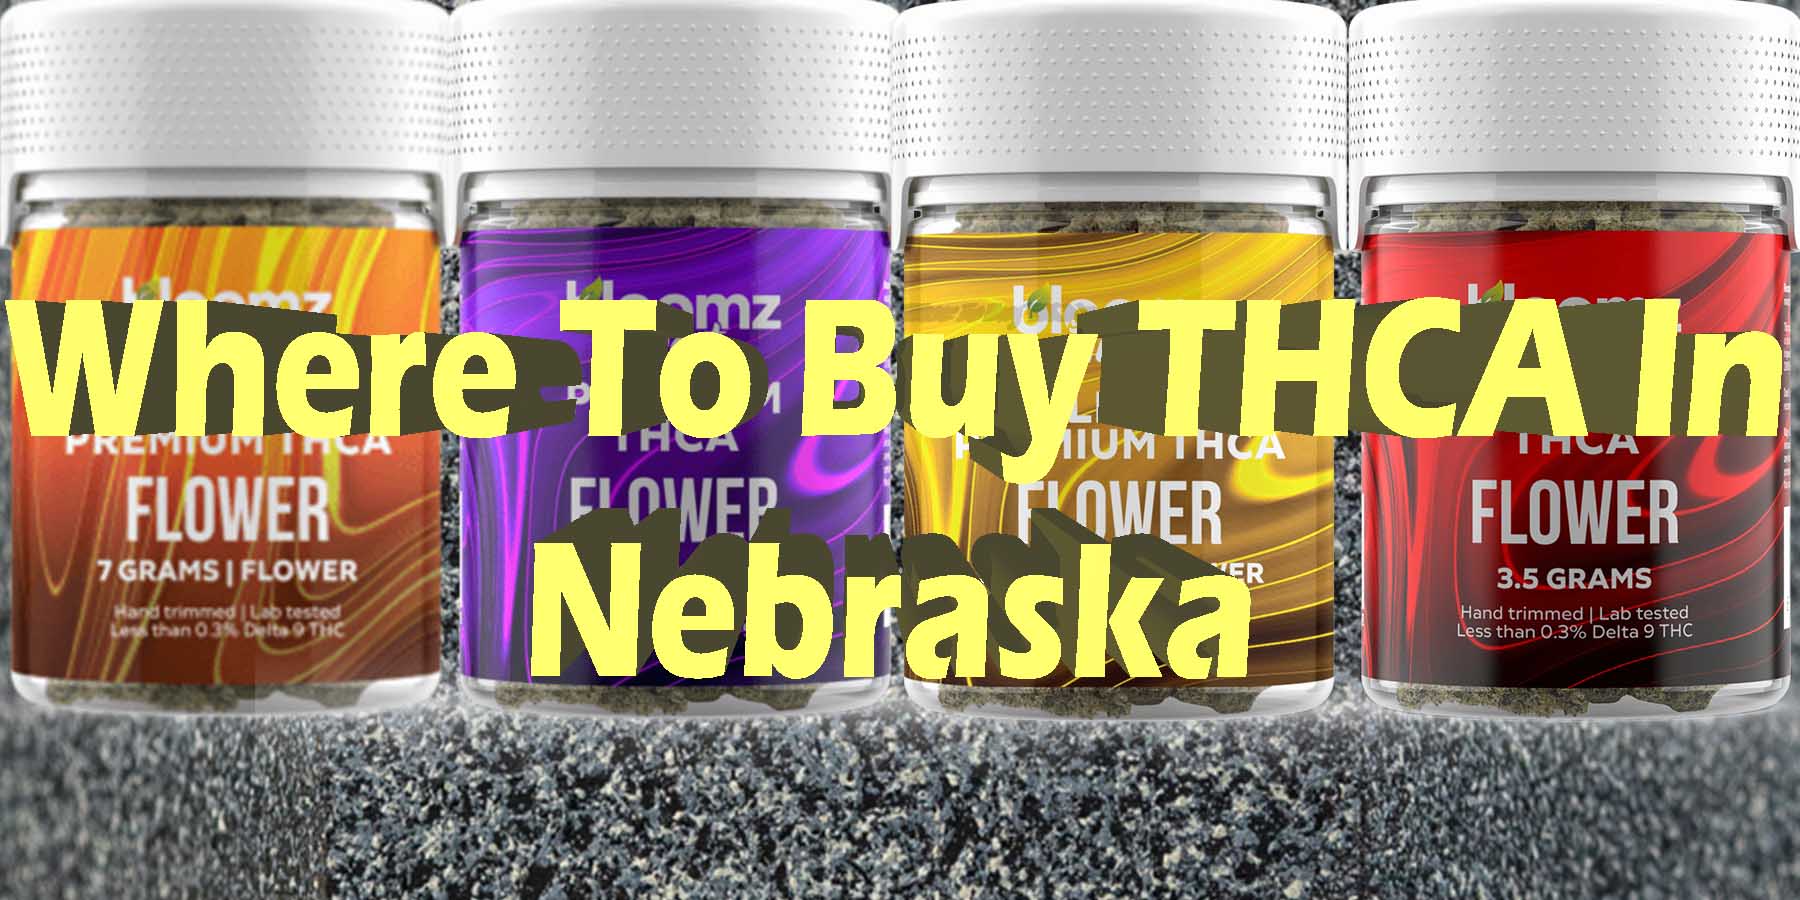 Where to Buy THCA in Nebraska WhereToGet HowToGetNearMe BestPlace LowestPrice Coupon Discount For Smoking Best High Smoke Shop Online Near Me StrongestBrand BestBrand Binoid Bloomz